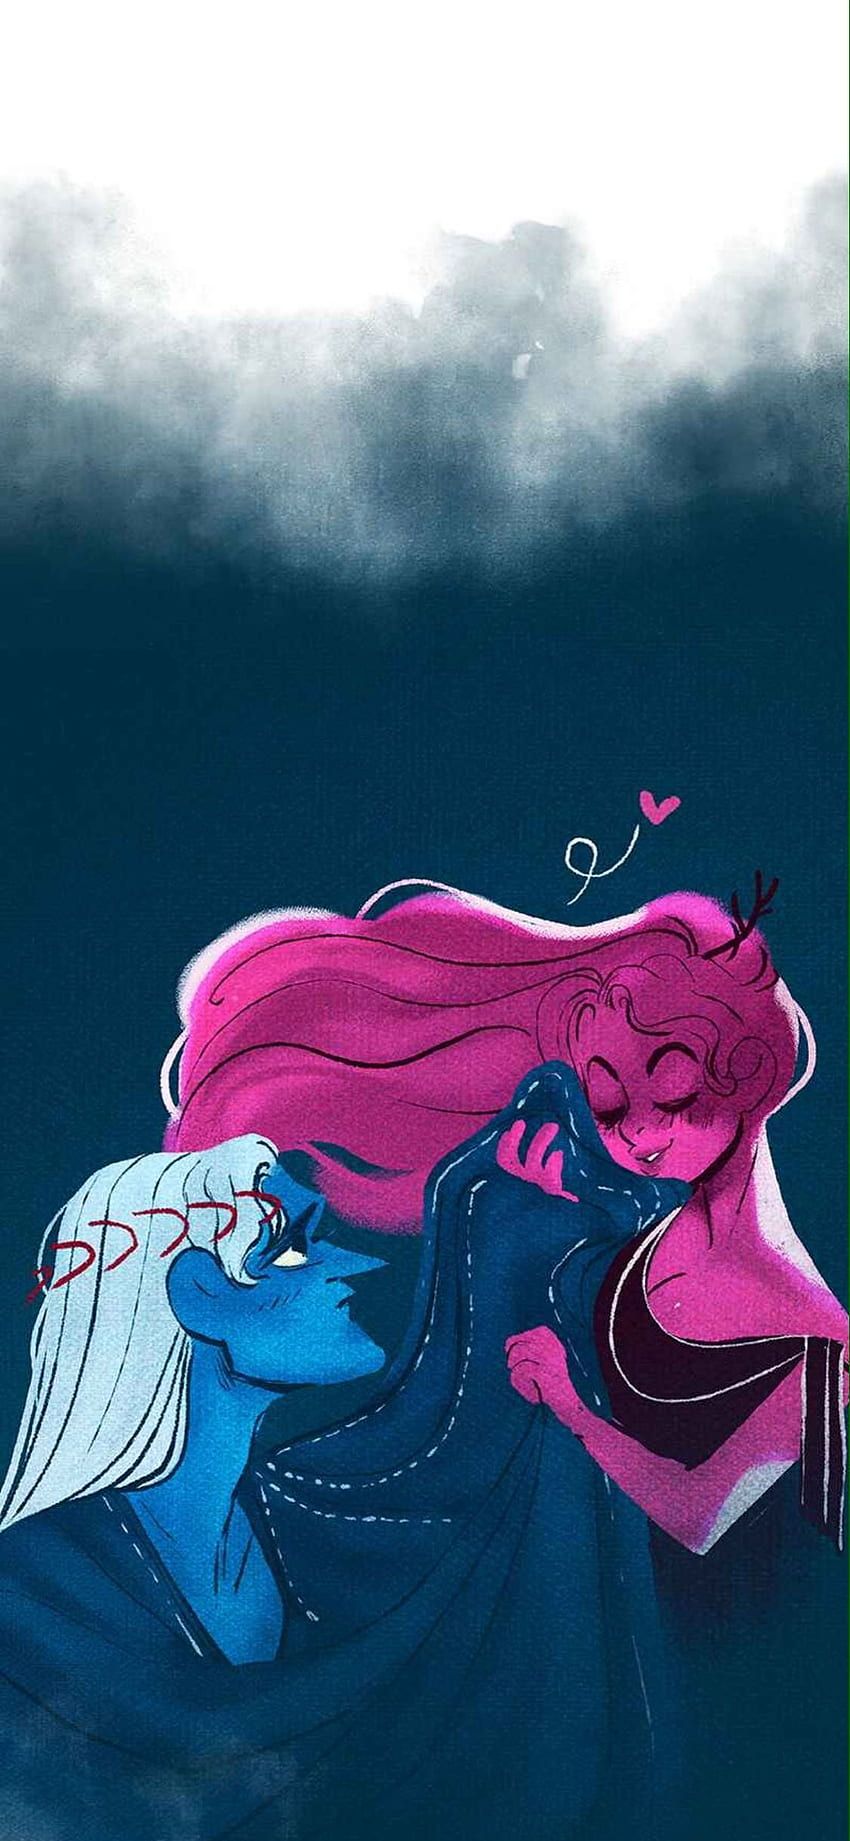 Aesthetic wallpaper of two characters from the animated TV show Steven Universe. - Hades